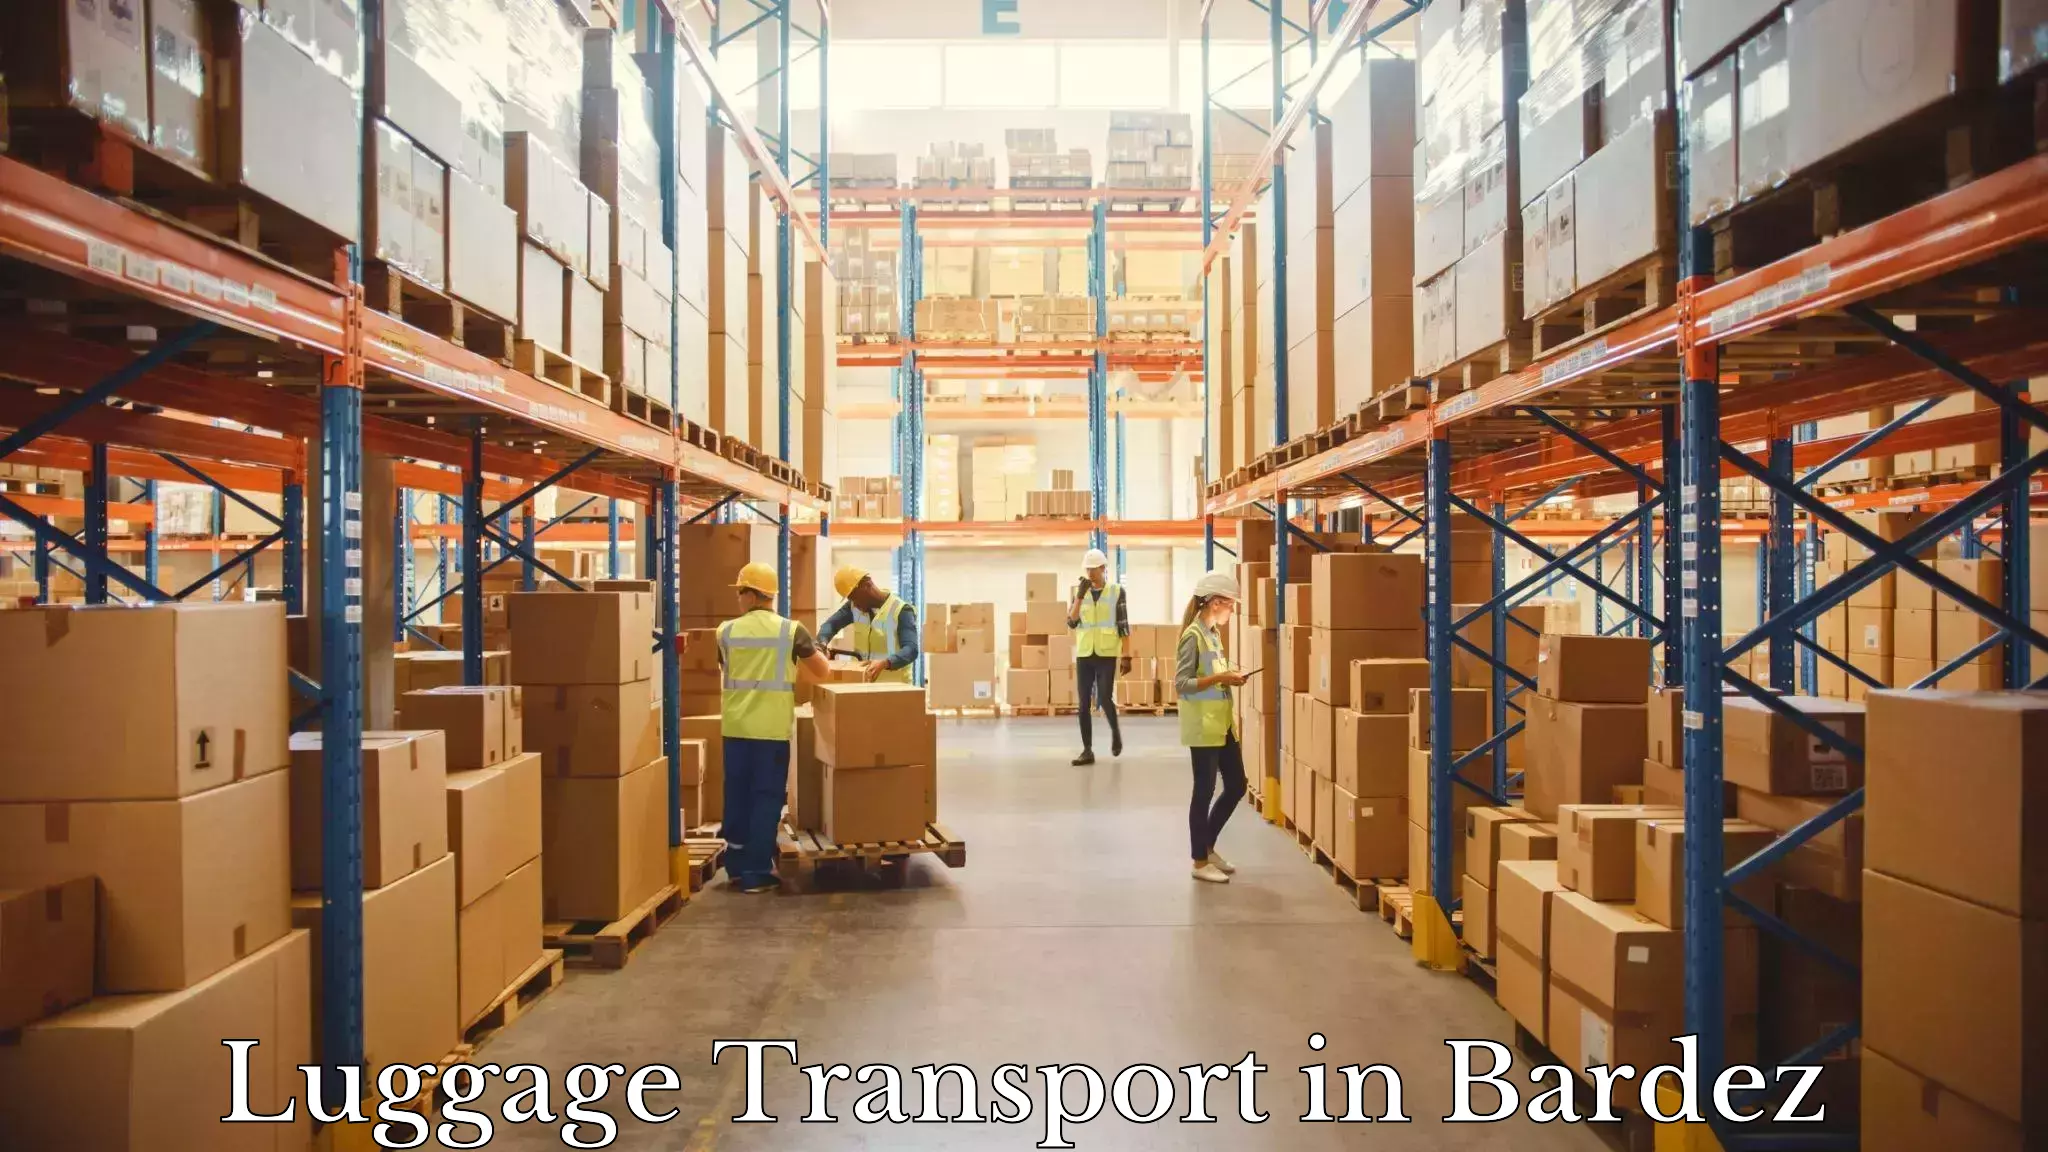 Luggage transport consulting in Bardez